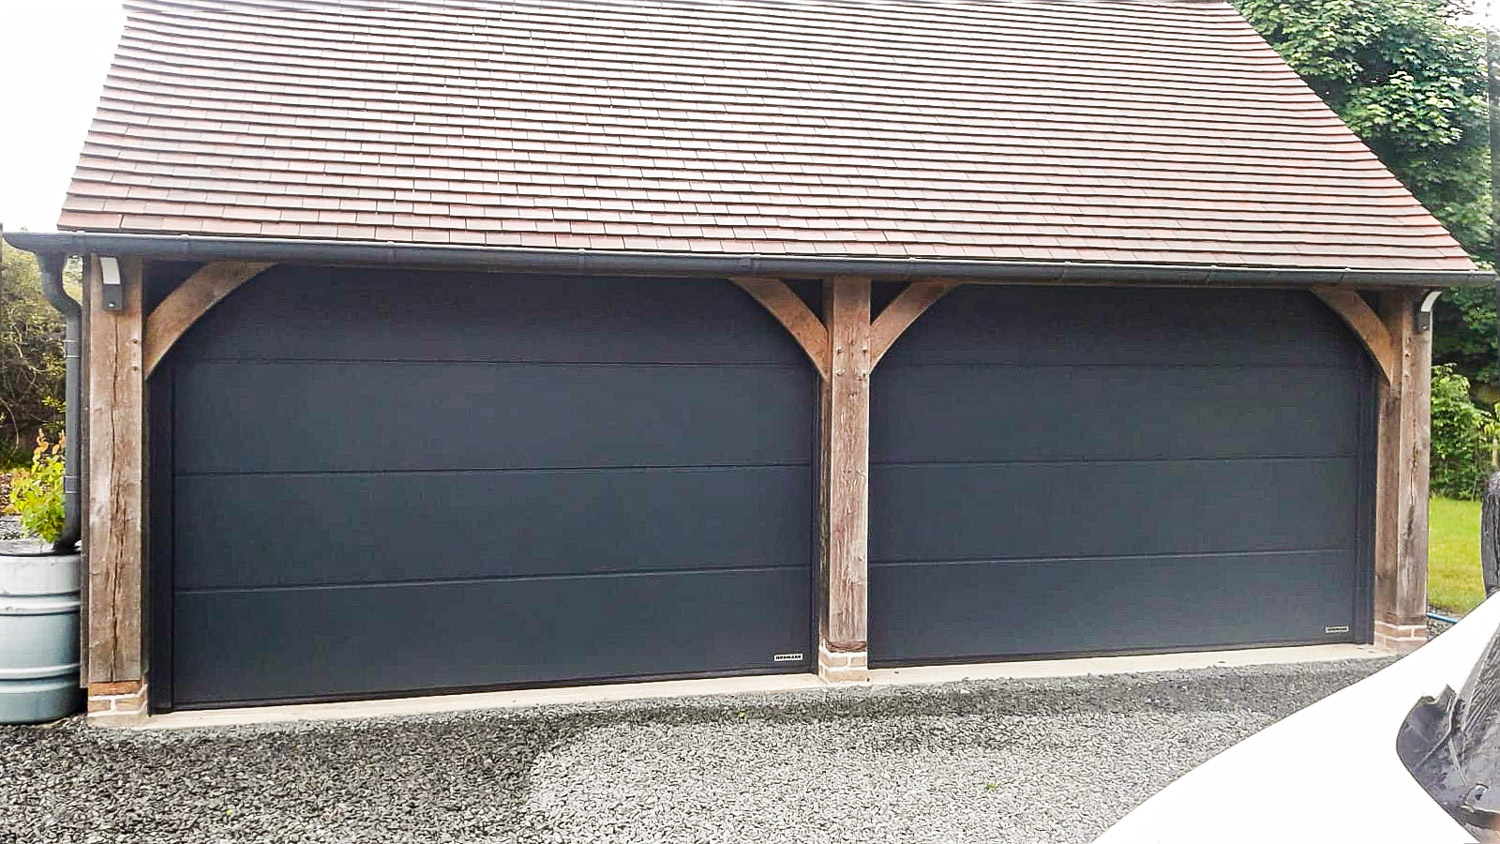 Hormann LPU42 L-Ribbed Insulated Steel Sectional Garage Doors in Anthracite Sandgrain